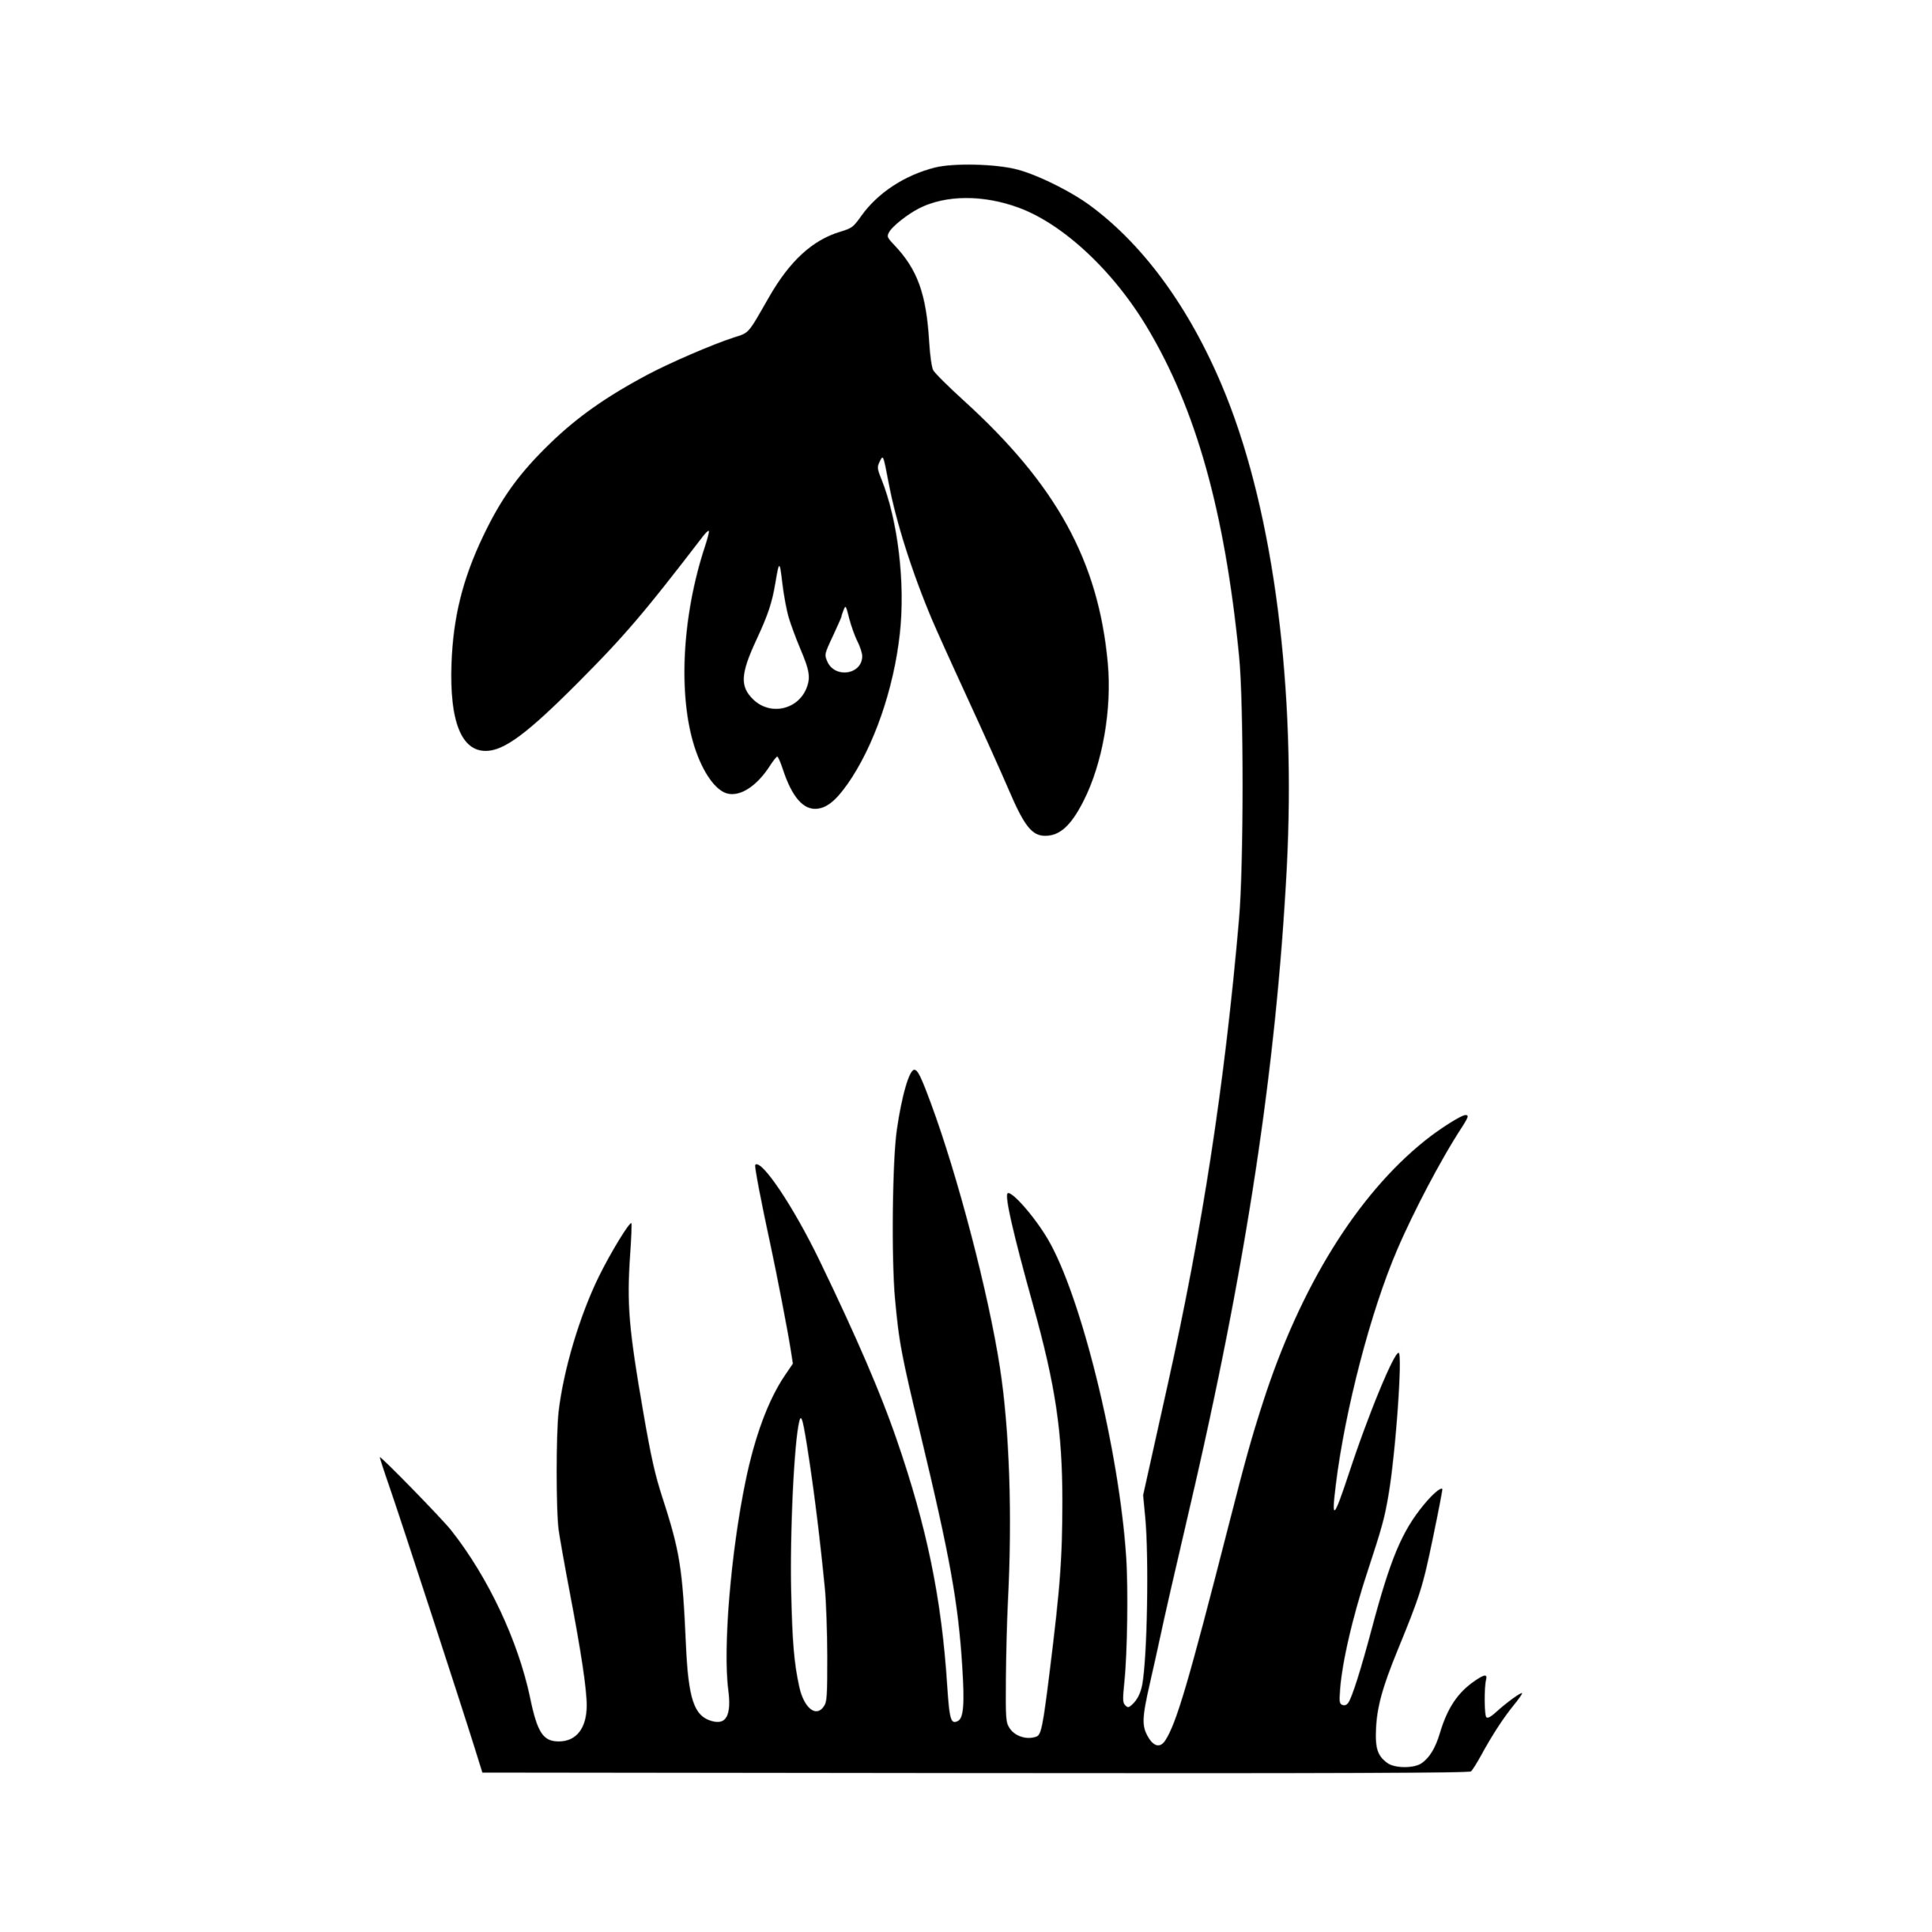 Snowdrop Flower SVG File: Instant Download for Cricut, Silhouette ...